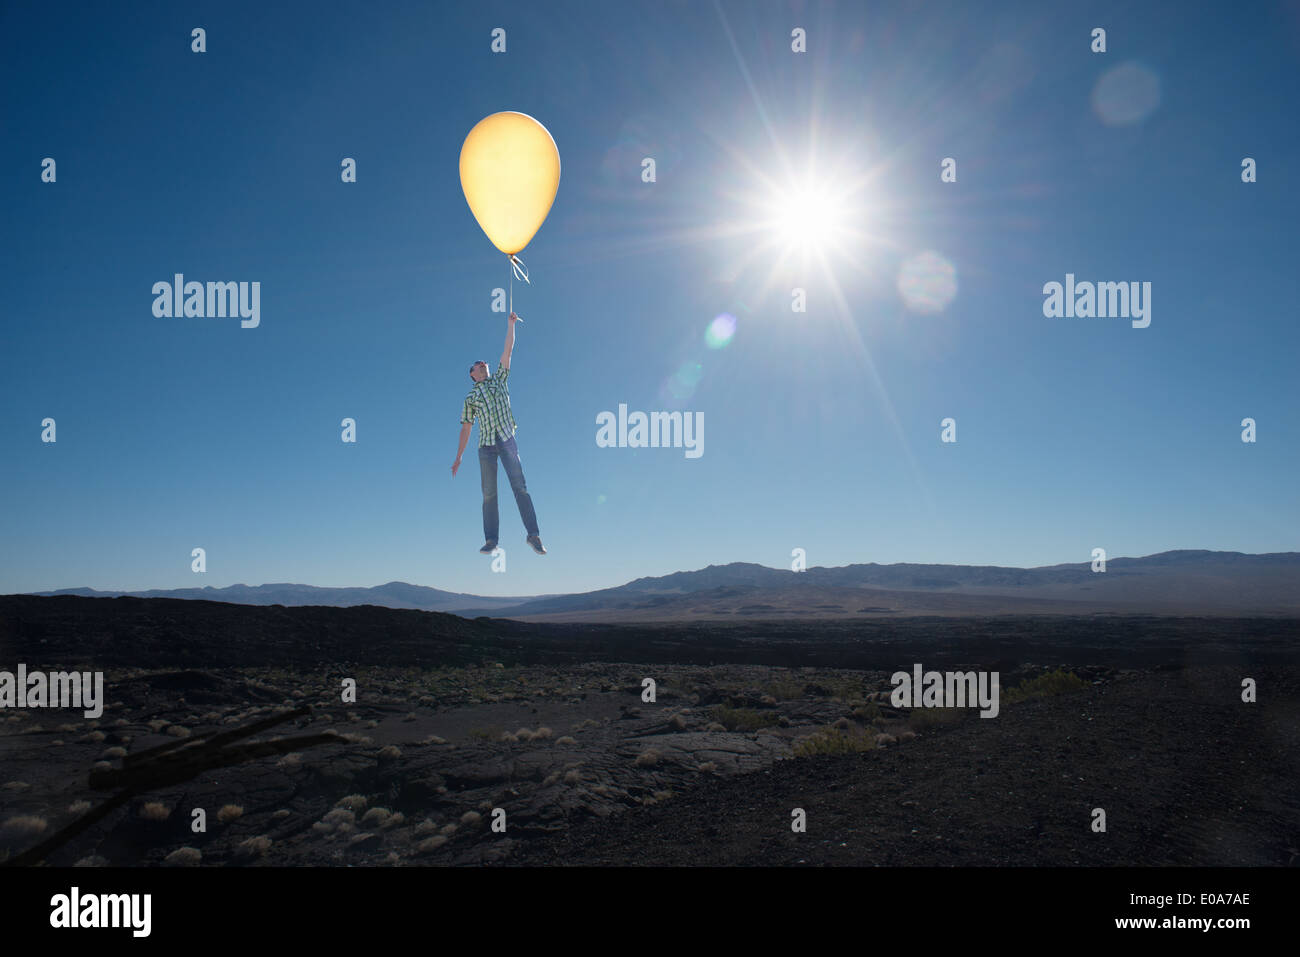 Mid adult man floating with balloon in desert Stock Photo